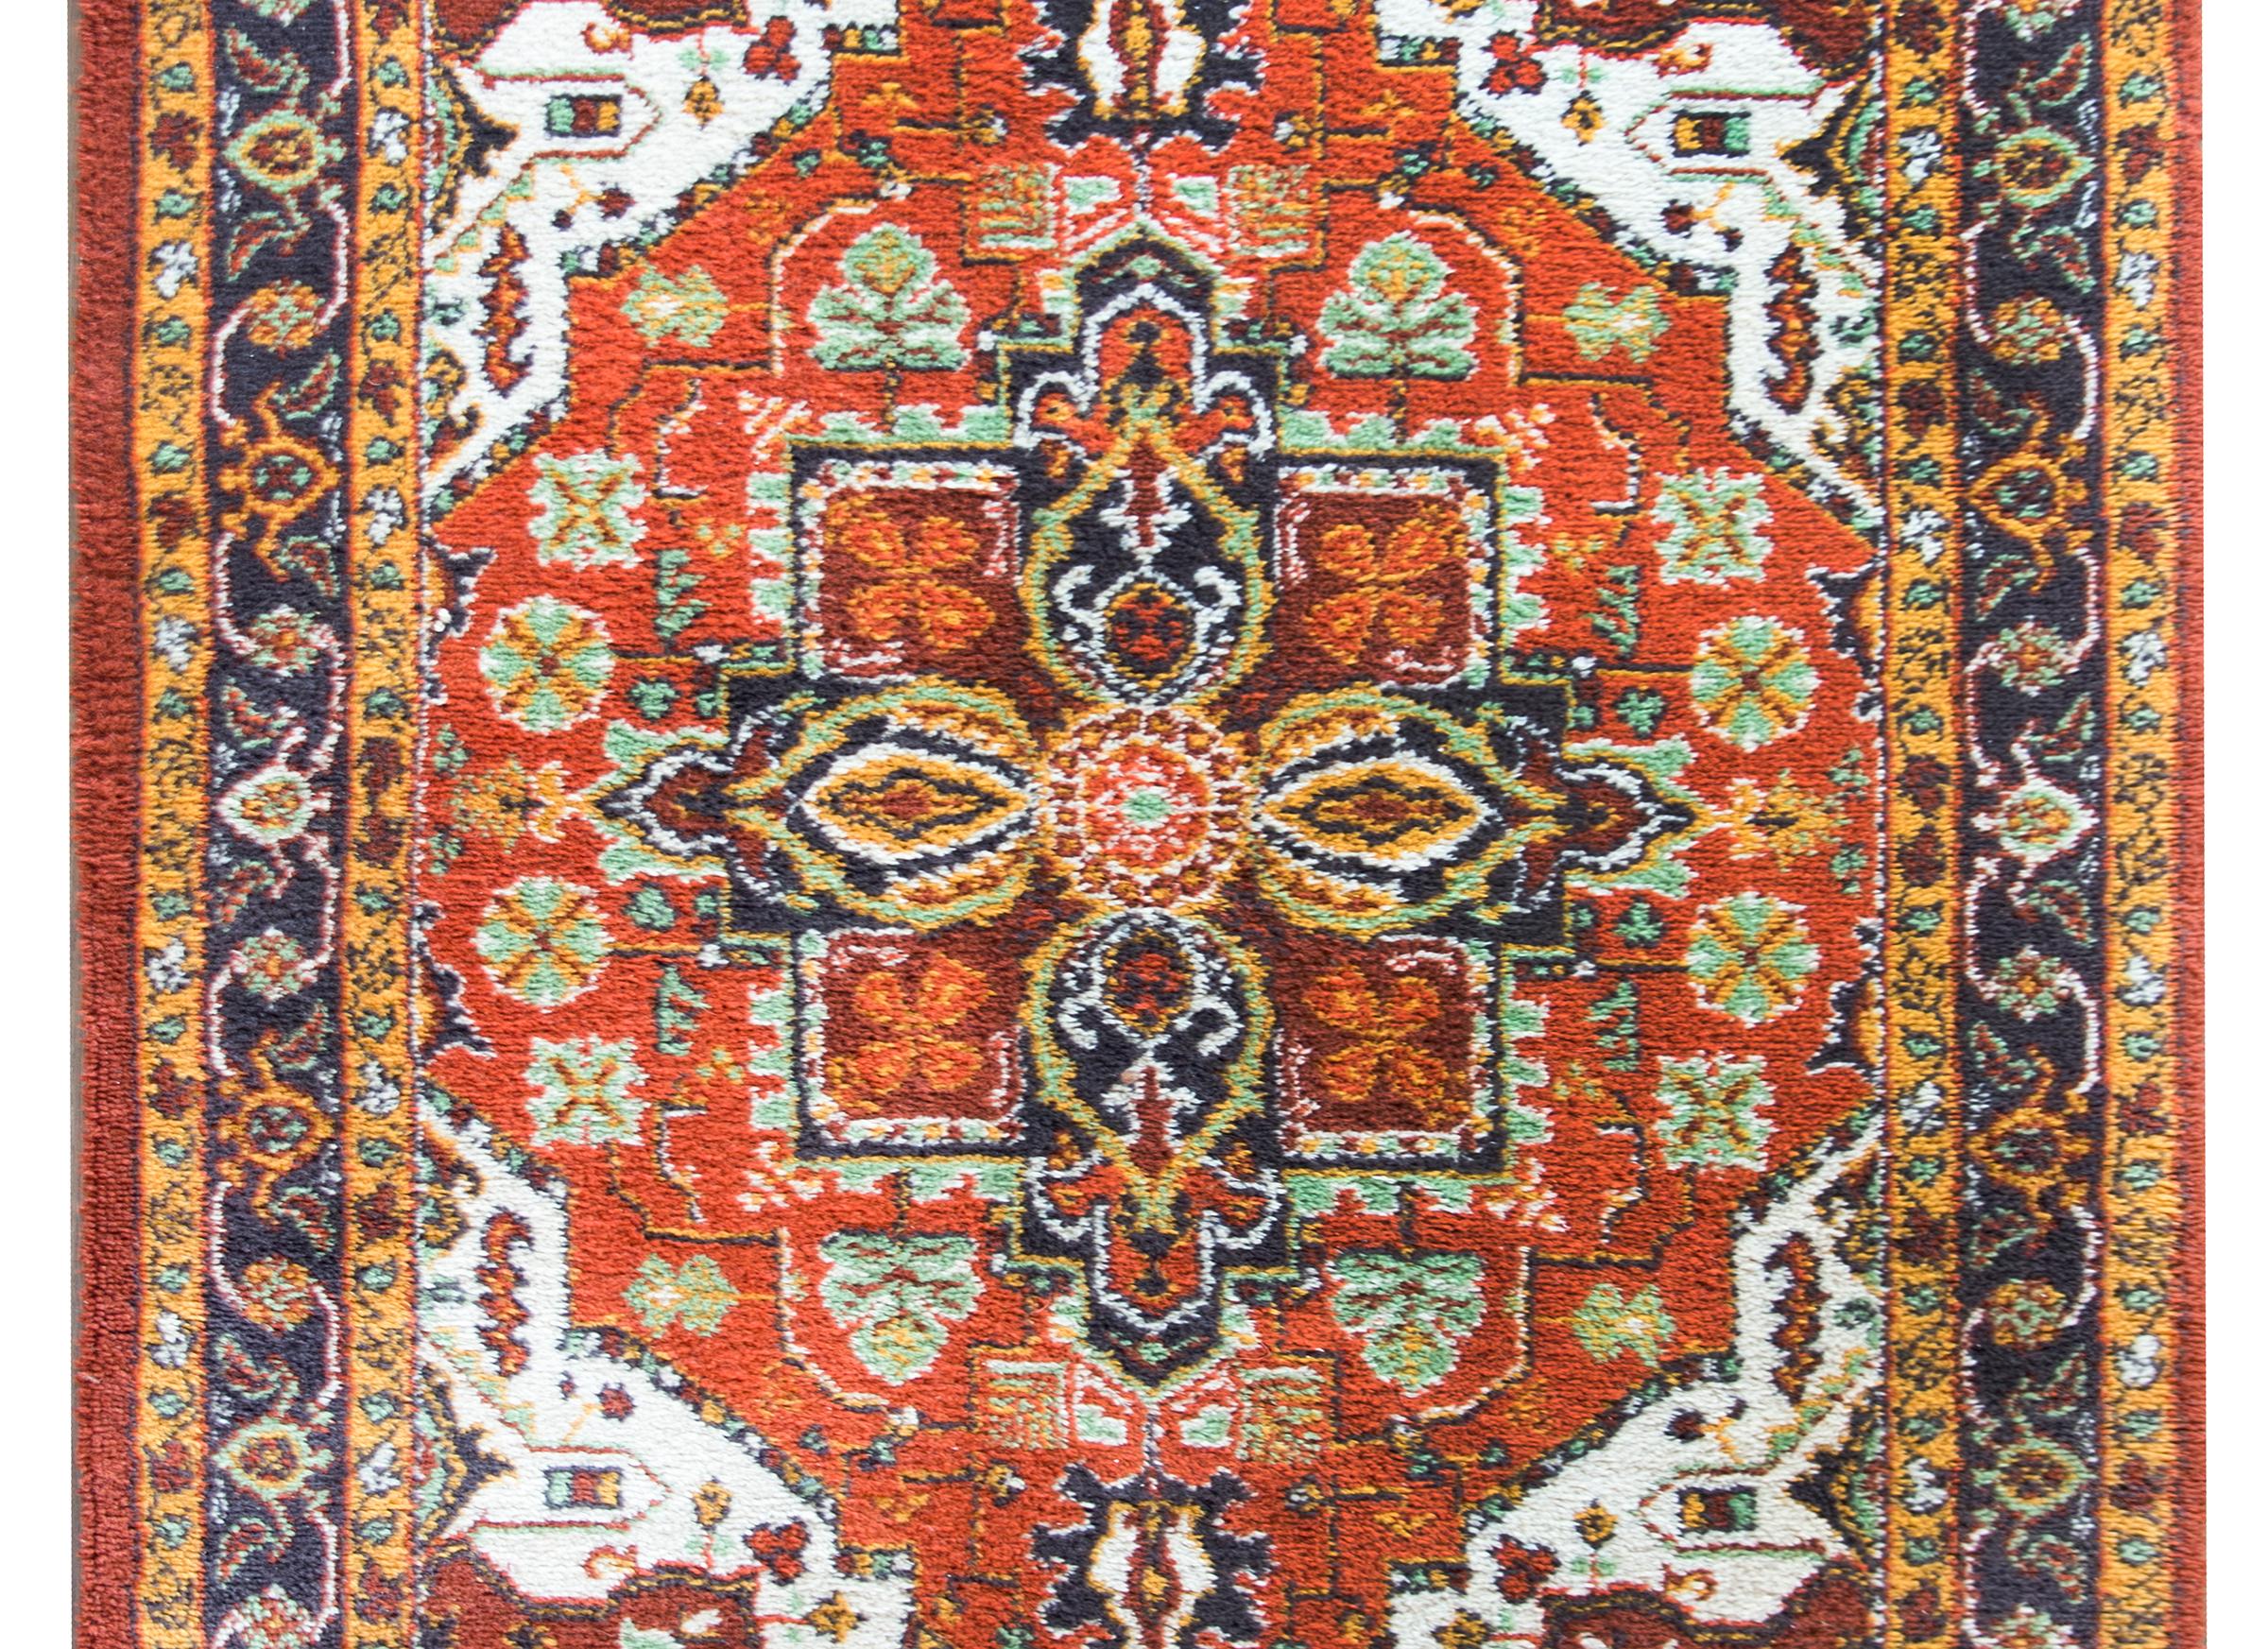 A chic late 20th century American hand-knotted Keristan rug with a Heriz-style pattern including a large central floral medallion living amidst a field of even more stylized flower and leaves, and surrounded by a complex border with multiple large